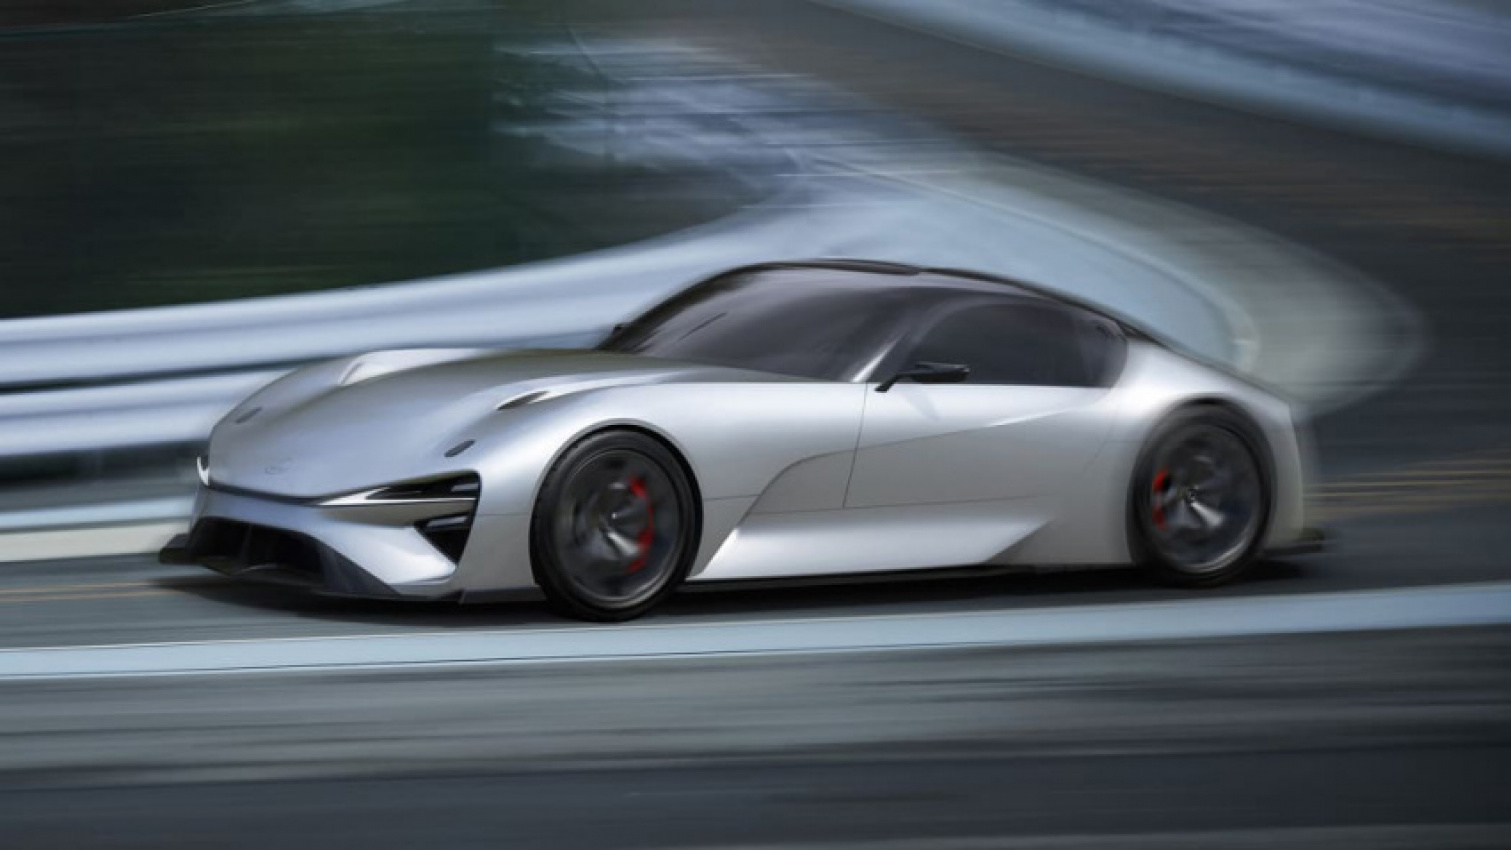 autos, cars, design/style, lexus, concept cars, coupe, electric, future vehicles, green, luxury, performance, lexus reveals more photos of its future electric sports car